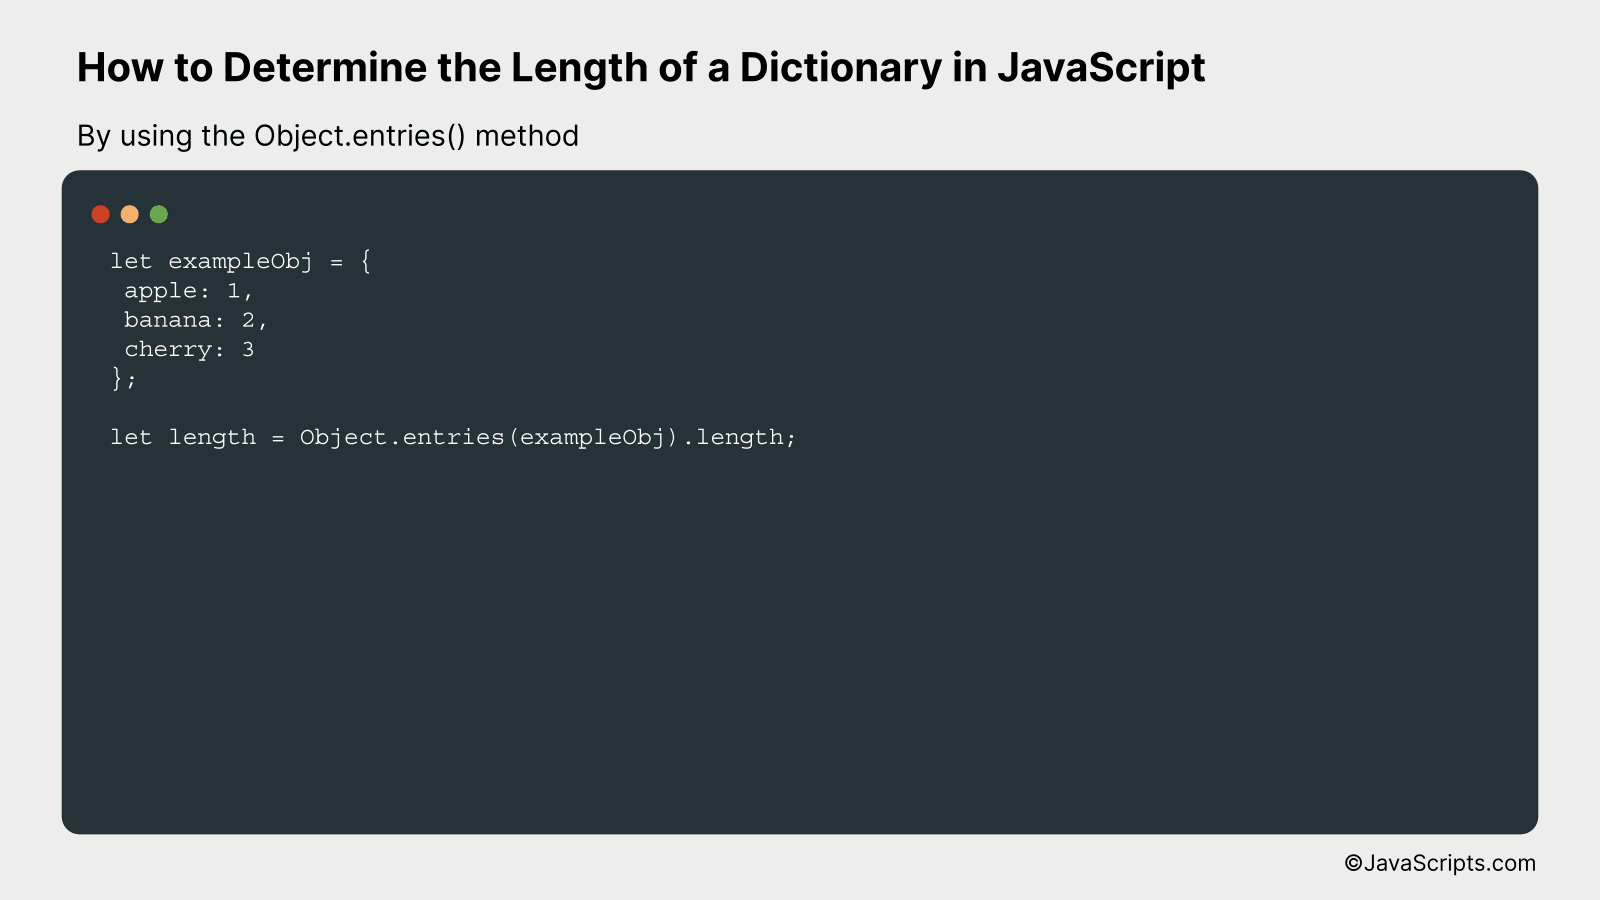 By using the Object.entries() method